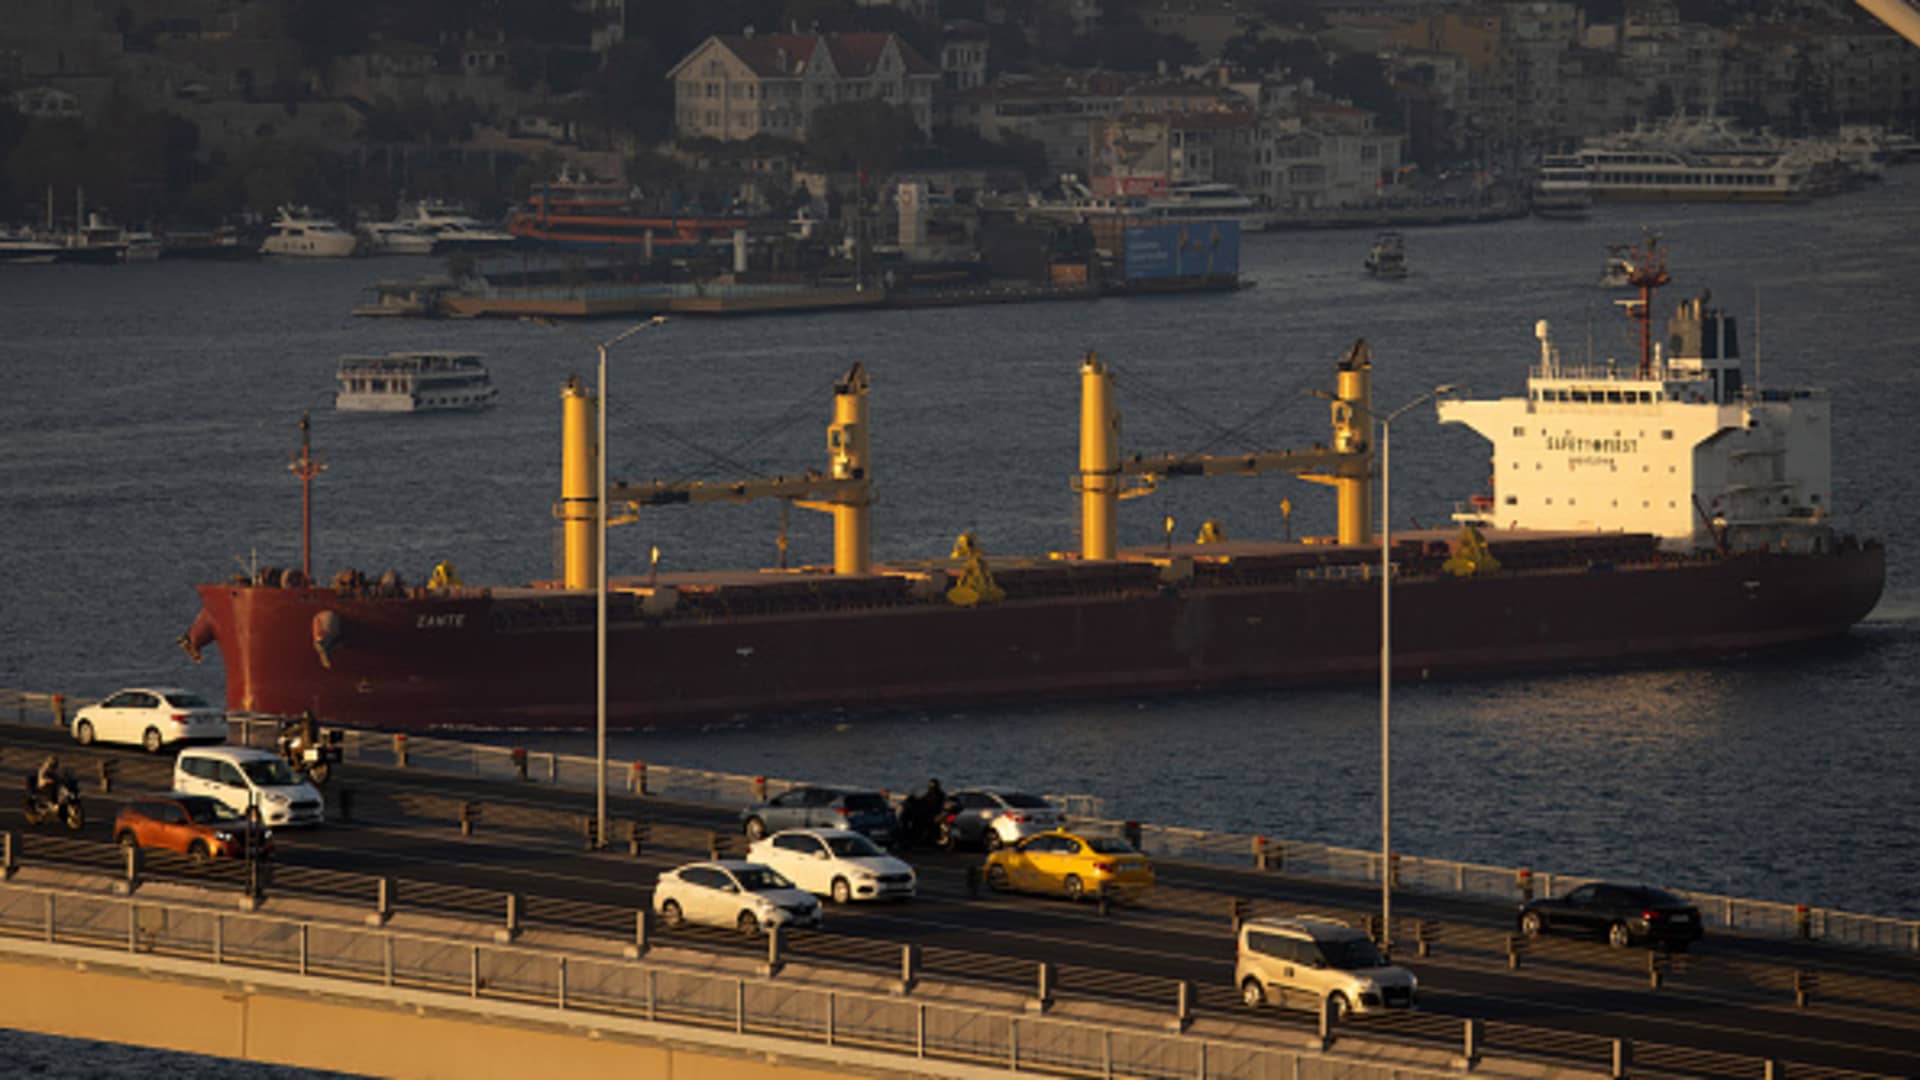 The Malta flagged bulk carrier Zante en-route to Belgium transits the Bosphorus carrying 47,270 metric tons of rapeseed from Ukraine after being held at the entrance of the Bosphorus due to Russia pulling out of the Black Sea Grain agreement on November 02, 2022 in Istanbul, Turkey.